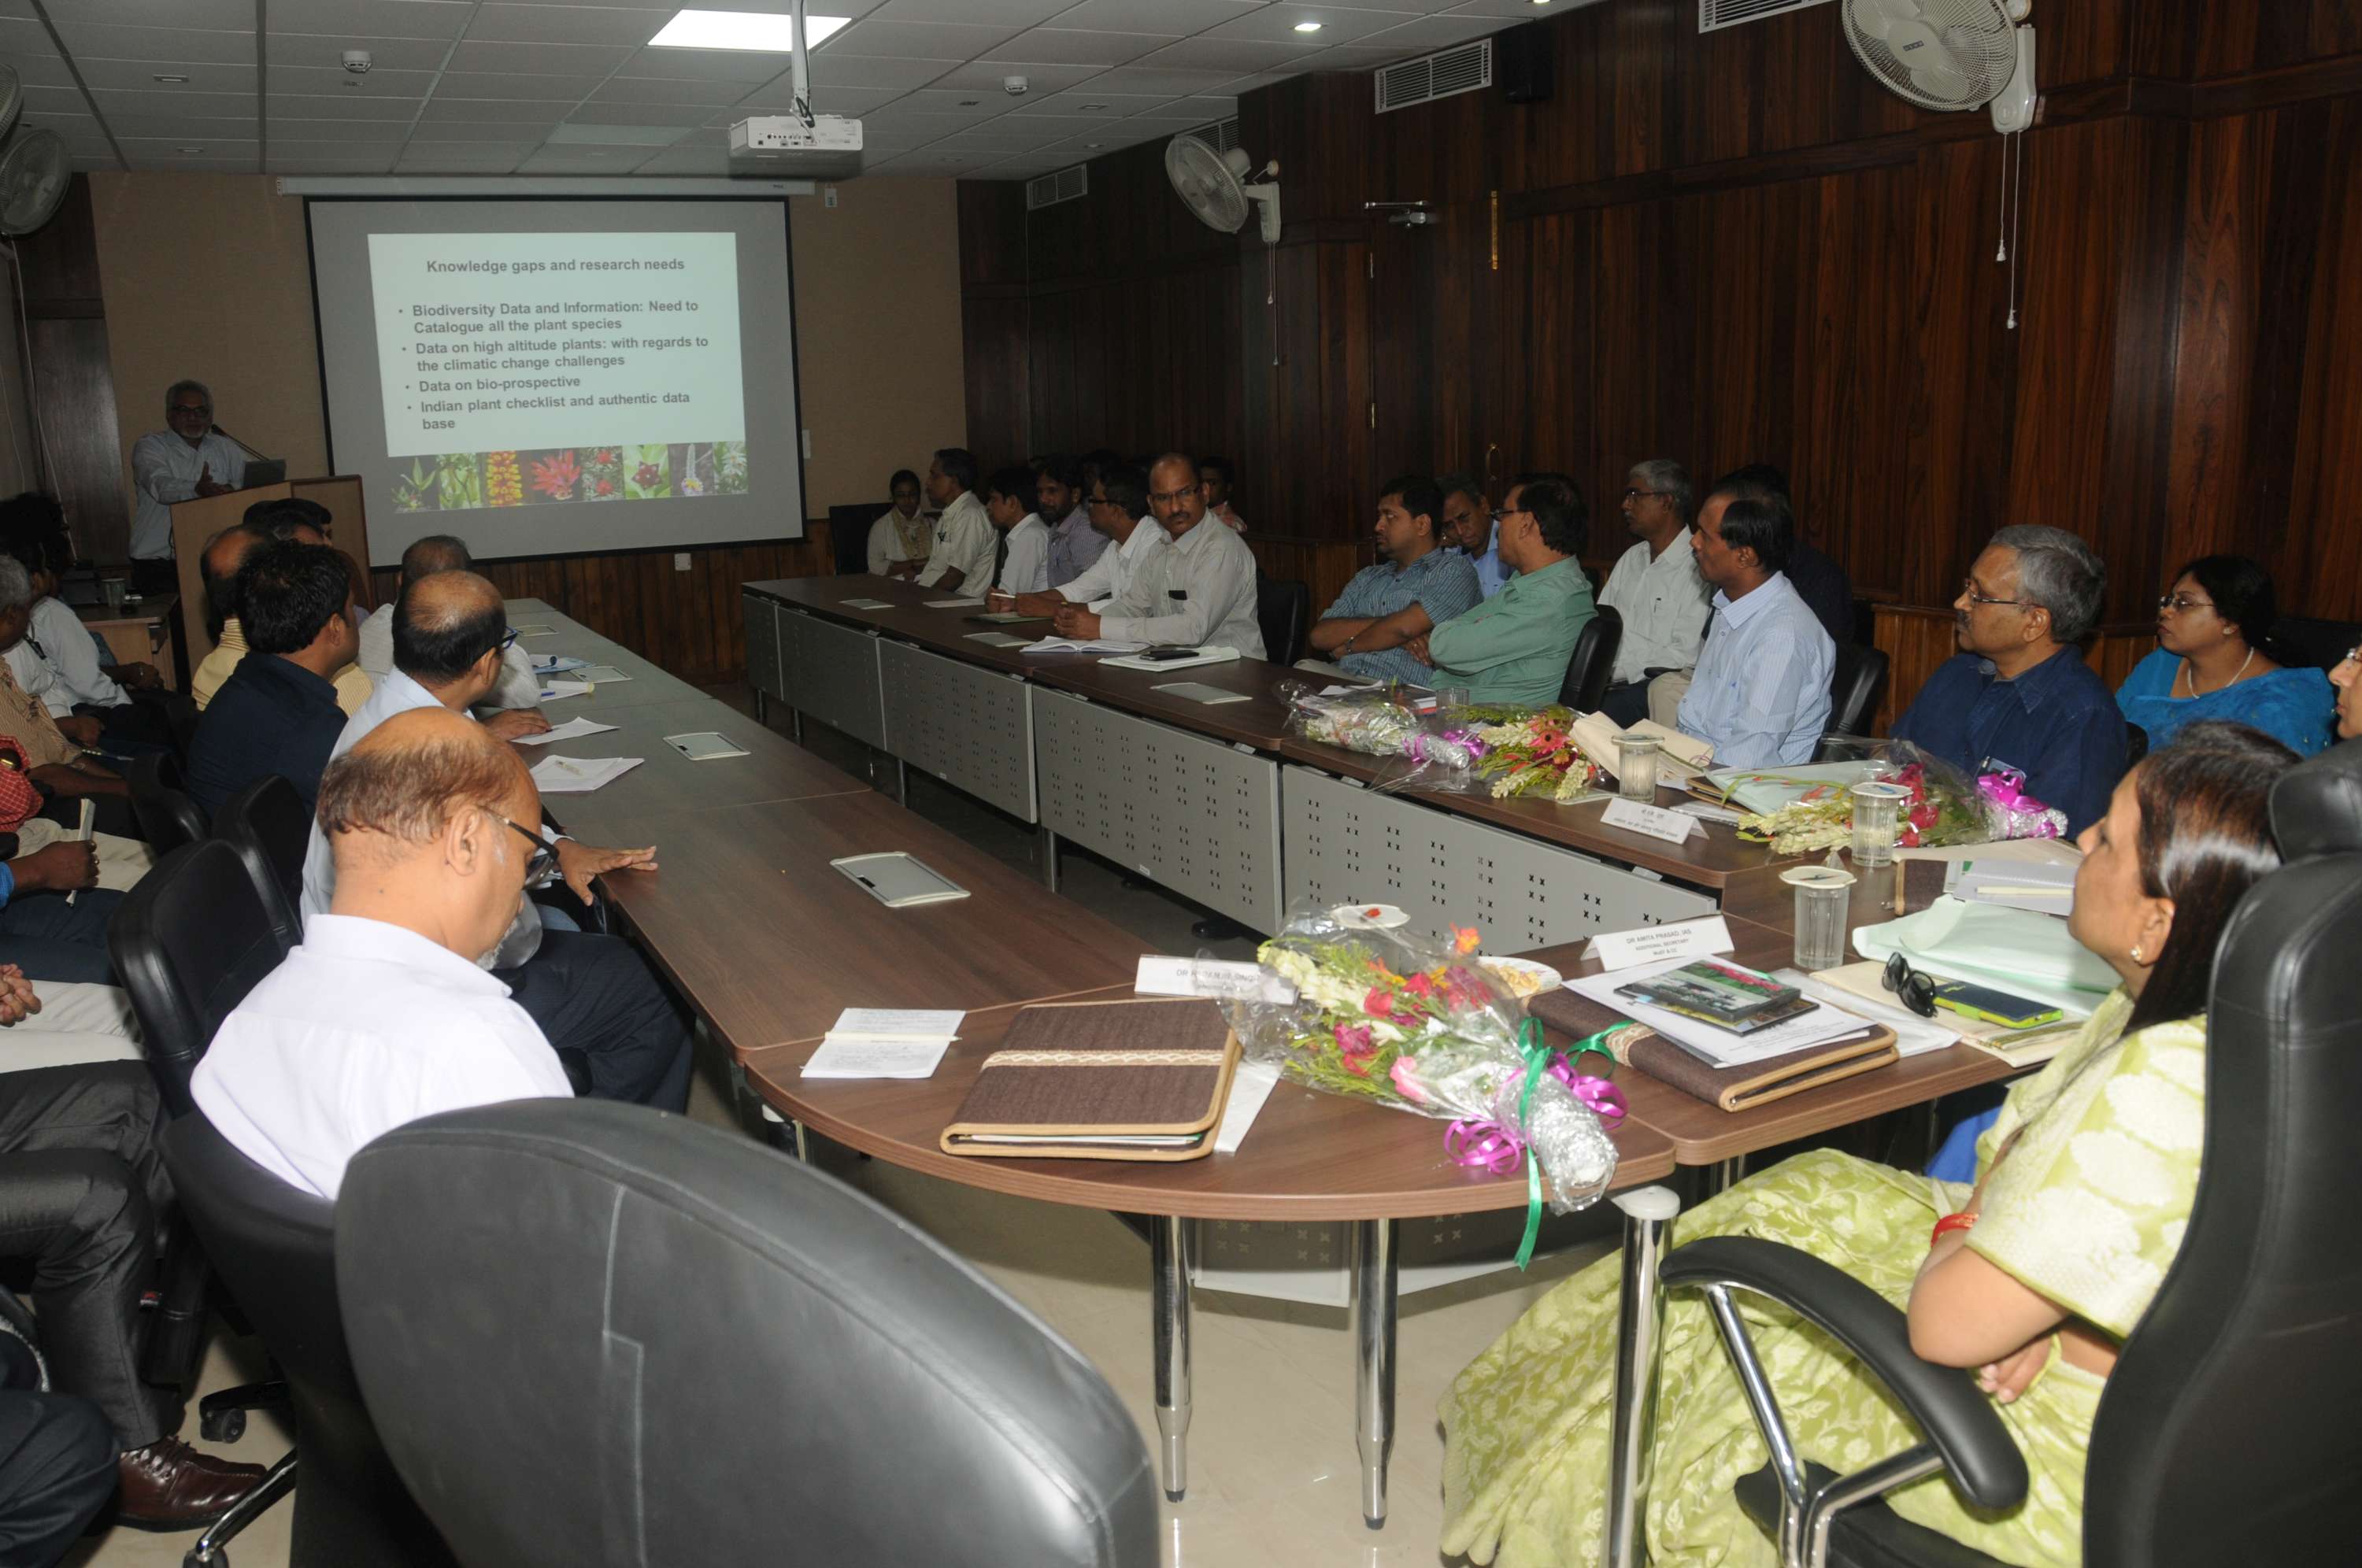 Reviewing of BSI work by Addl. Secretary at CNH committee room